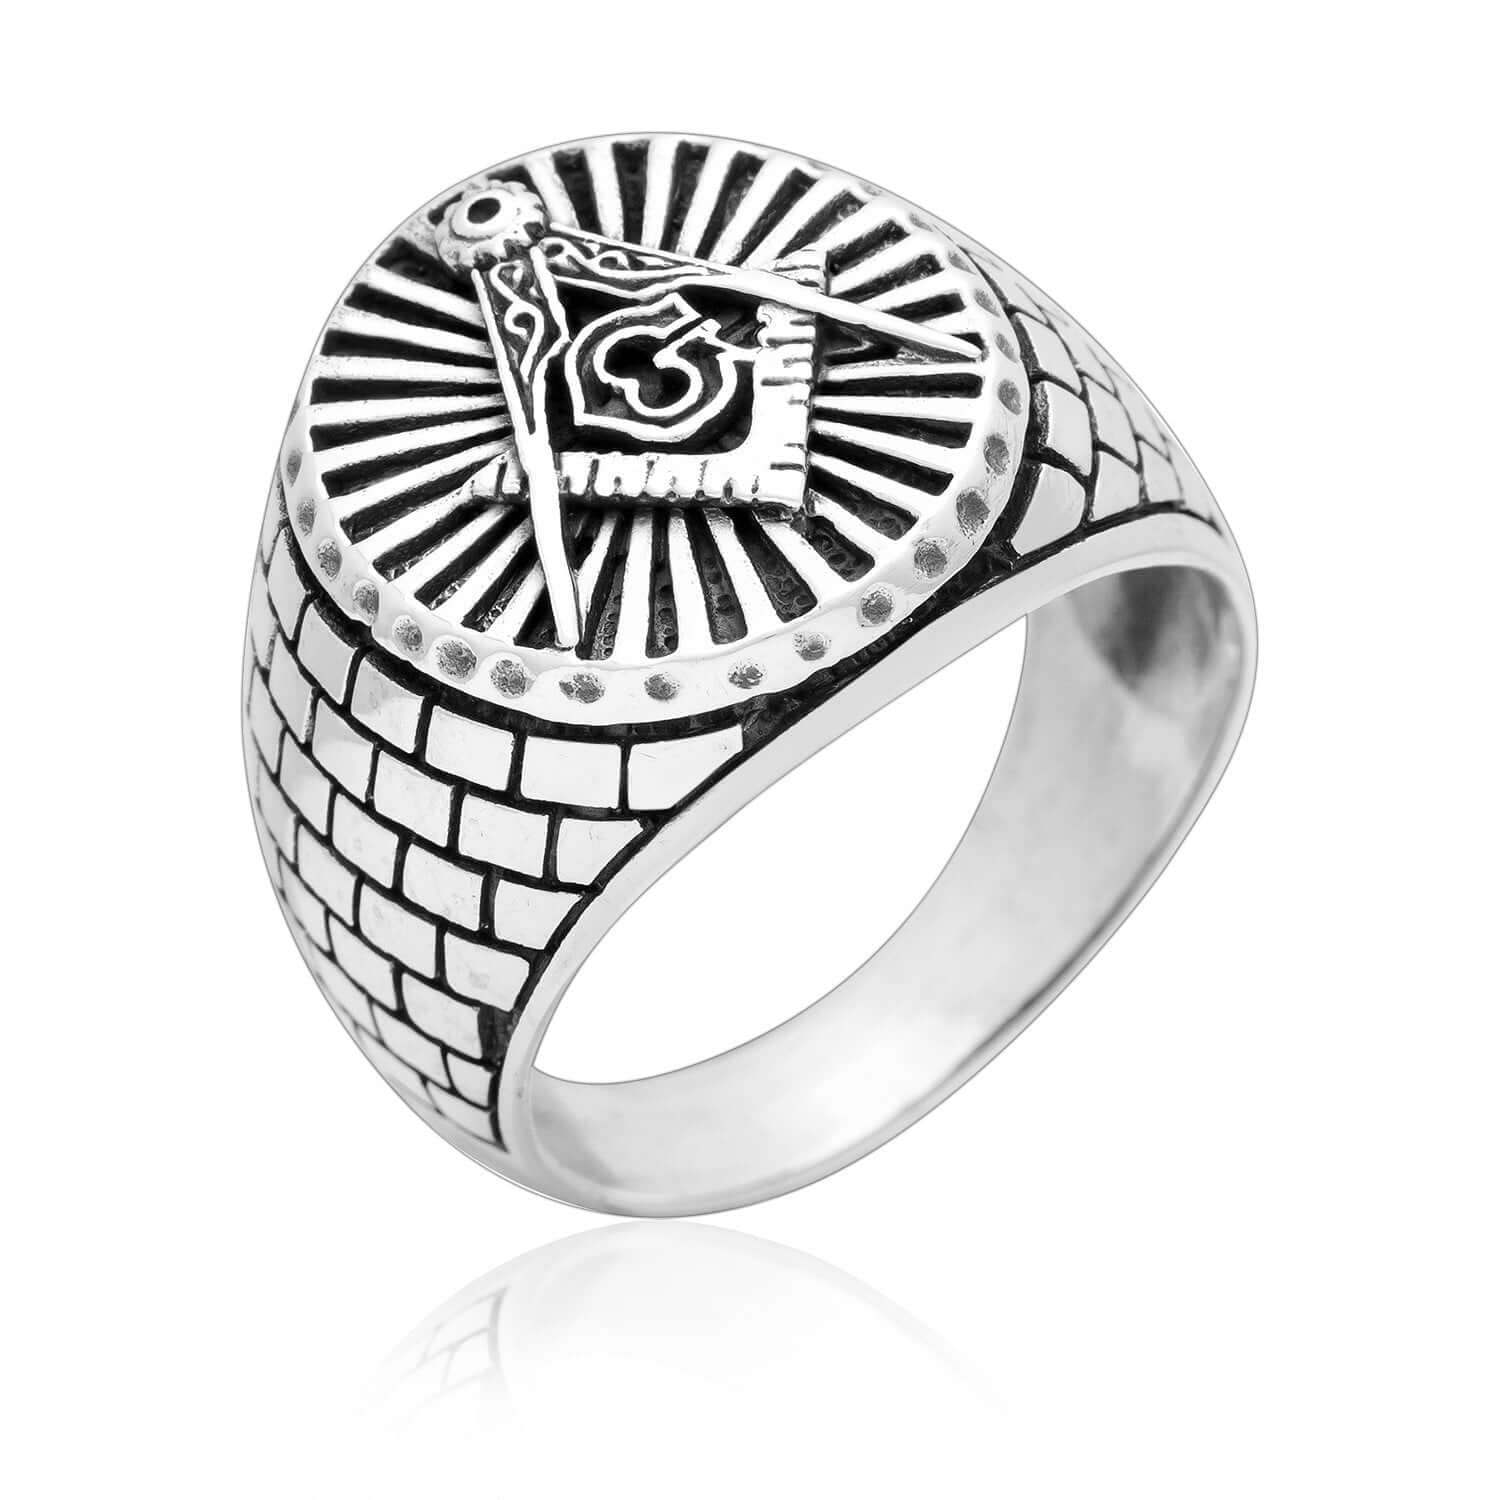 925 Sterling Silver Masonic Compass Signet Ring - SilverMania925